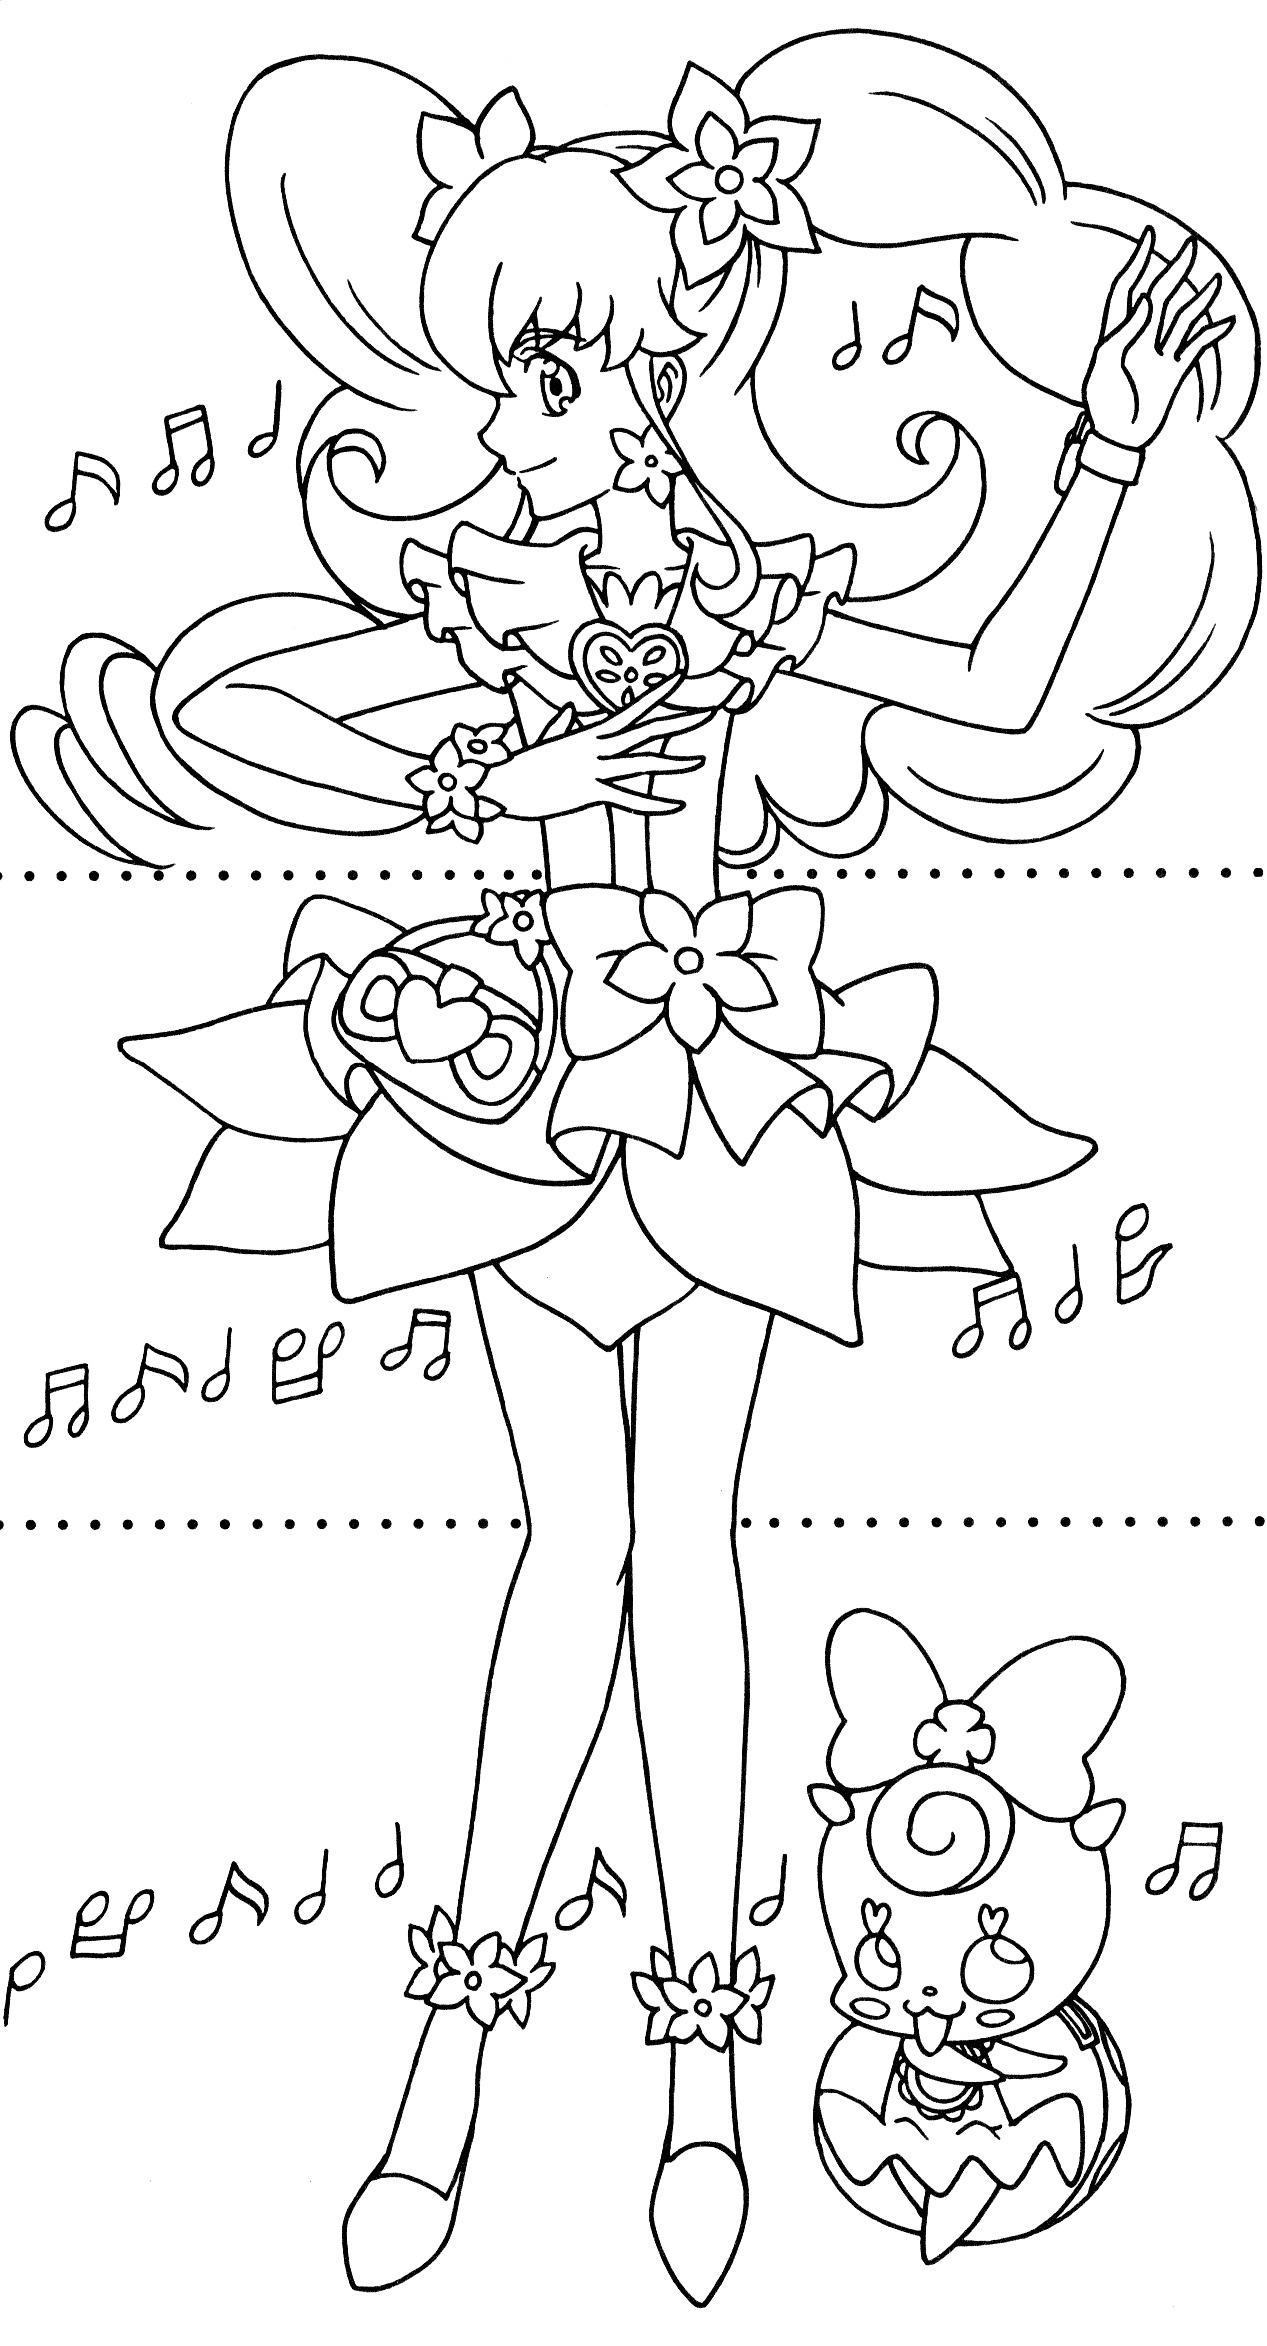 Happiness Charge Precure Dressup Coloring Book 16